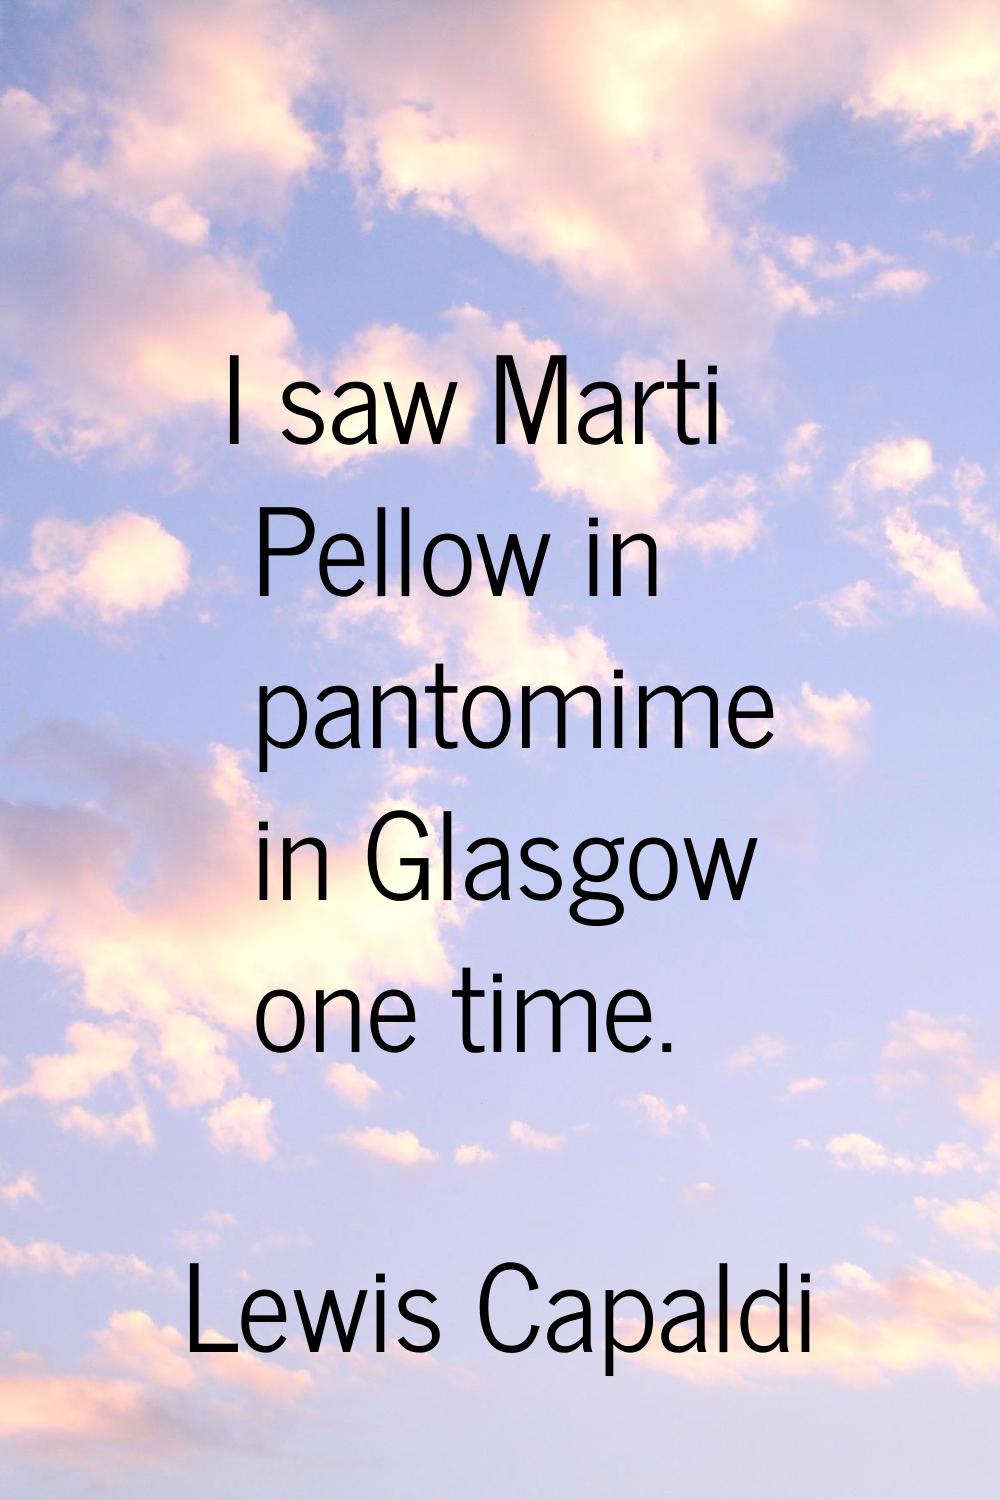 I saw Marti Pellow in pantomime in Glasgow one time.